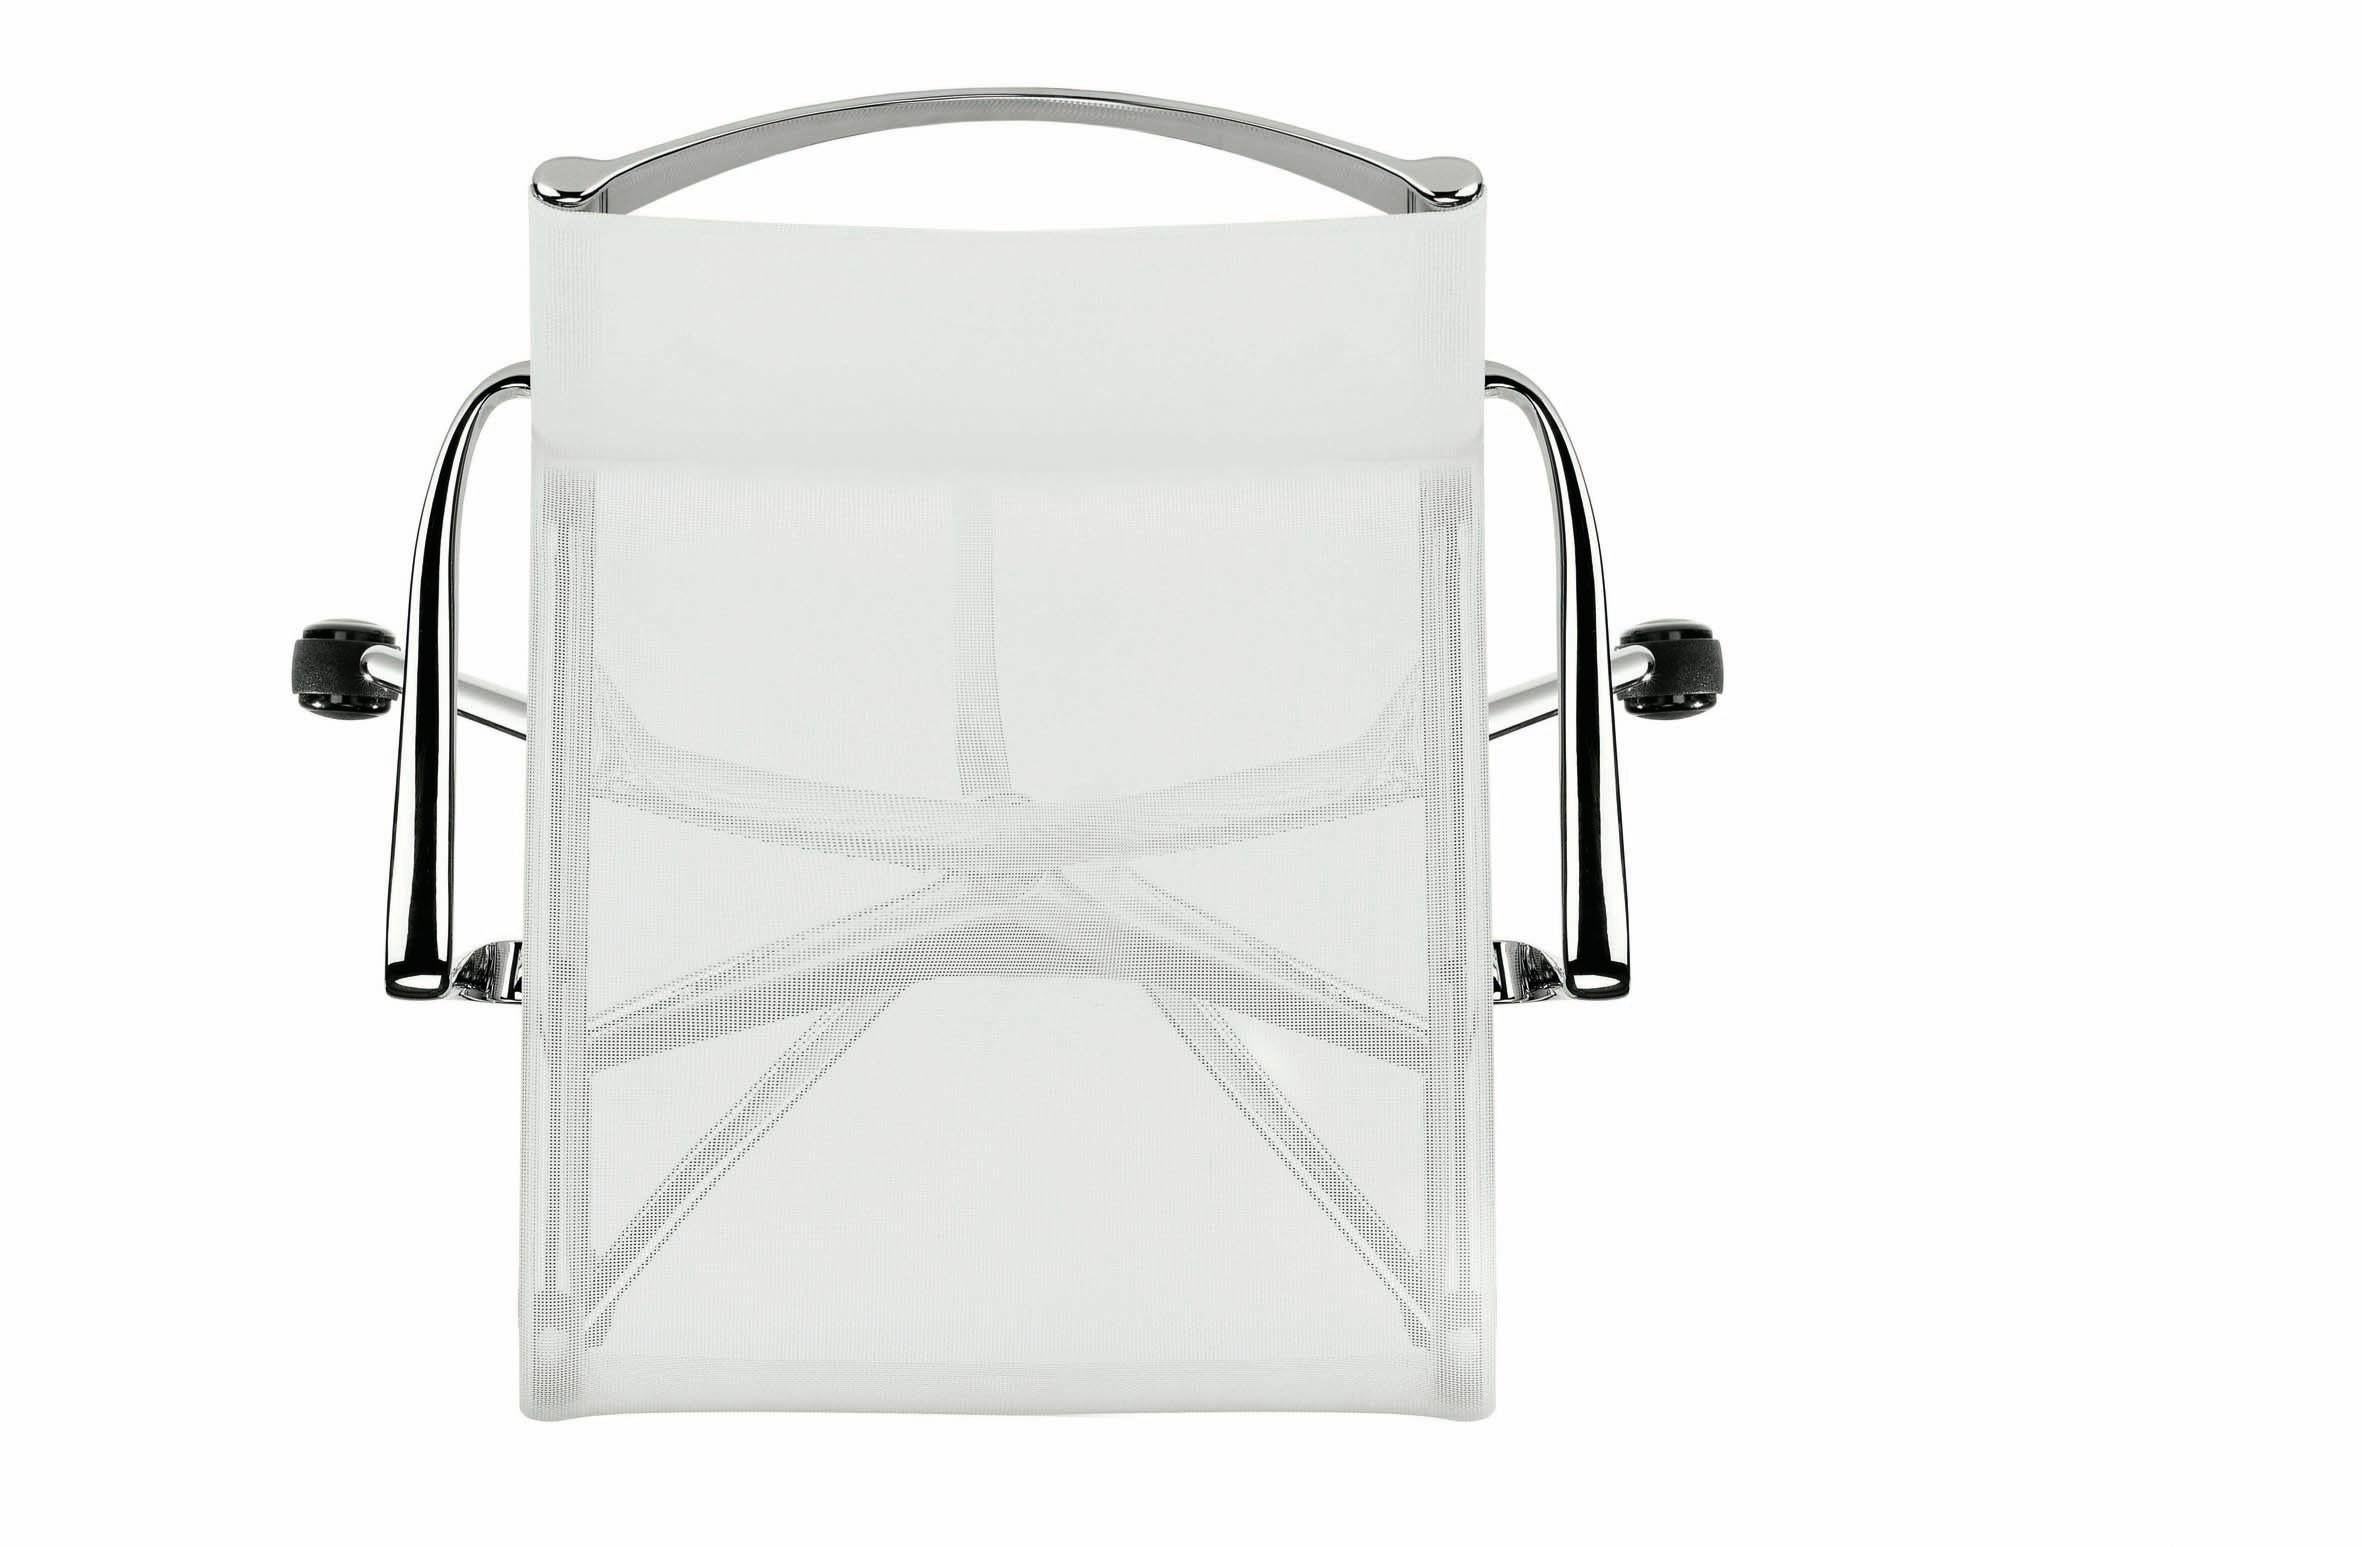 Alias 434 Rollingframe 44 Chair White Mesh with Chromed Aluminum Frame by Alberto Meda

Height adjustable chair with arms, with soft (or hard or soft breaking ***) castors and 5-star swivel base. Structure made of extruded aluminium profile and